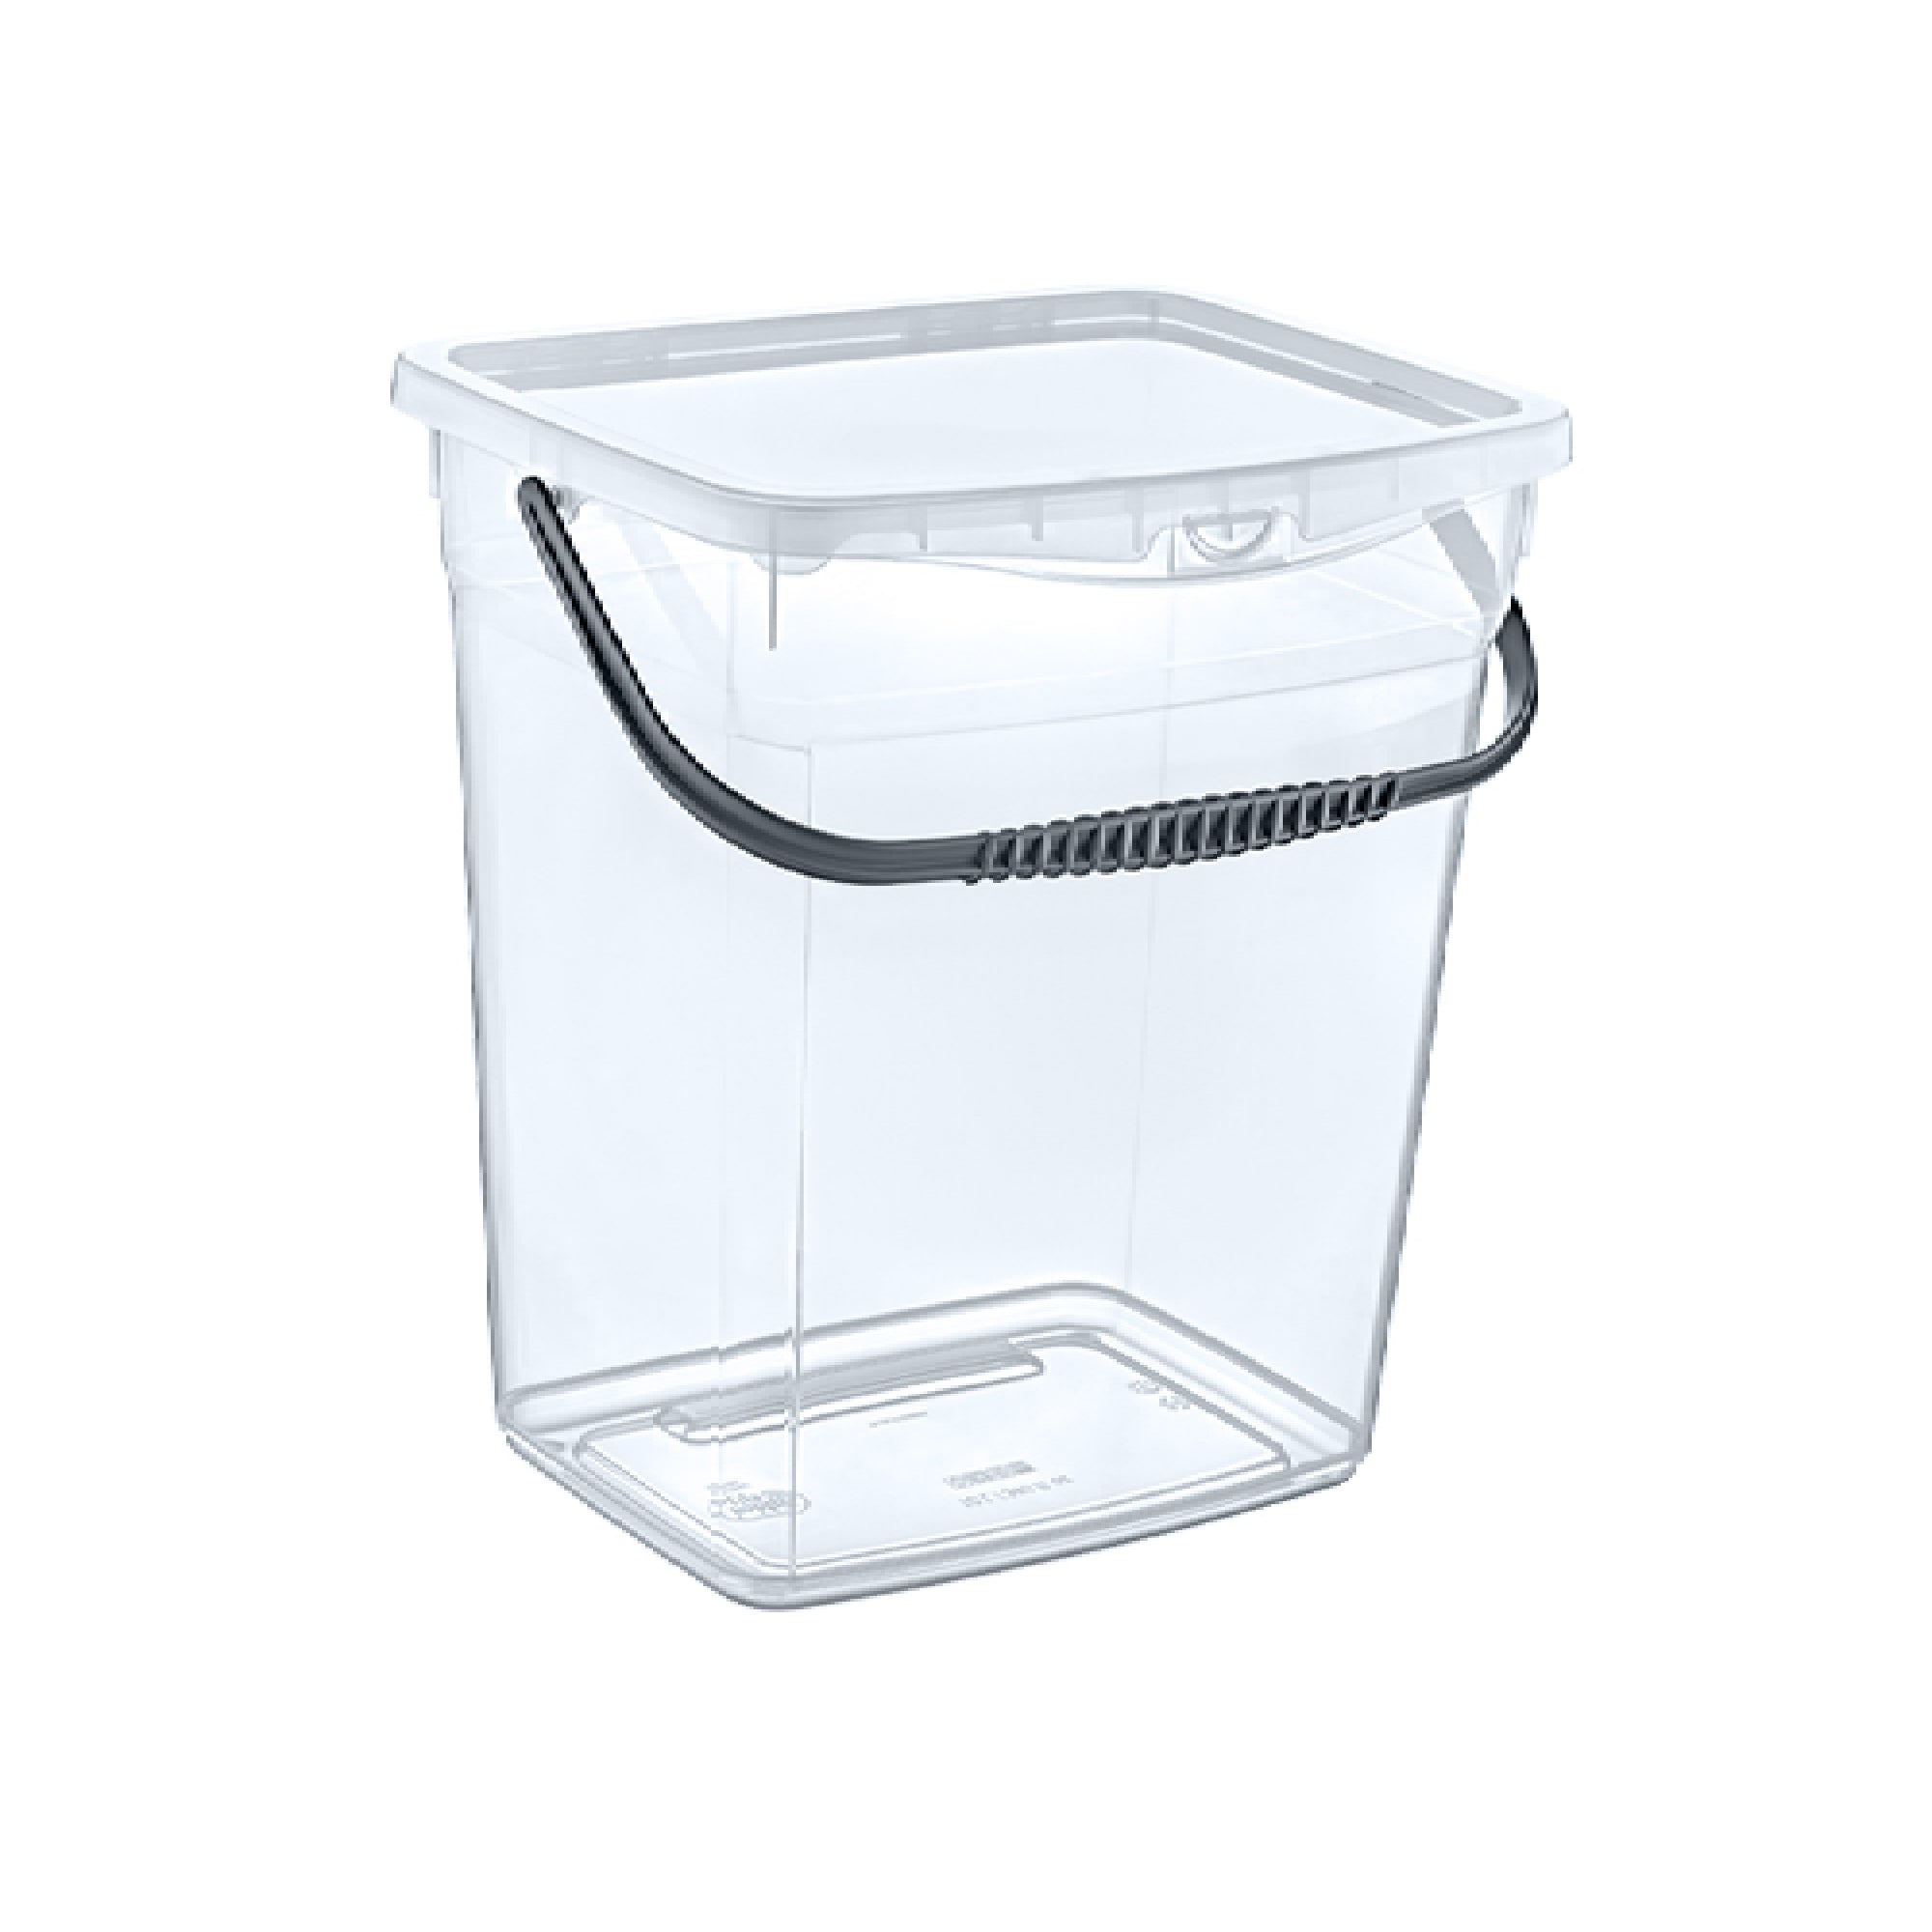 Hobby Life Plastic Storage Utility Container Box with handle 6L Q Box 021195